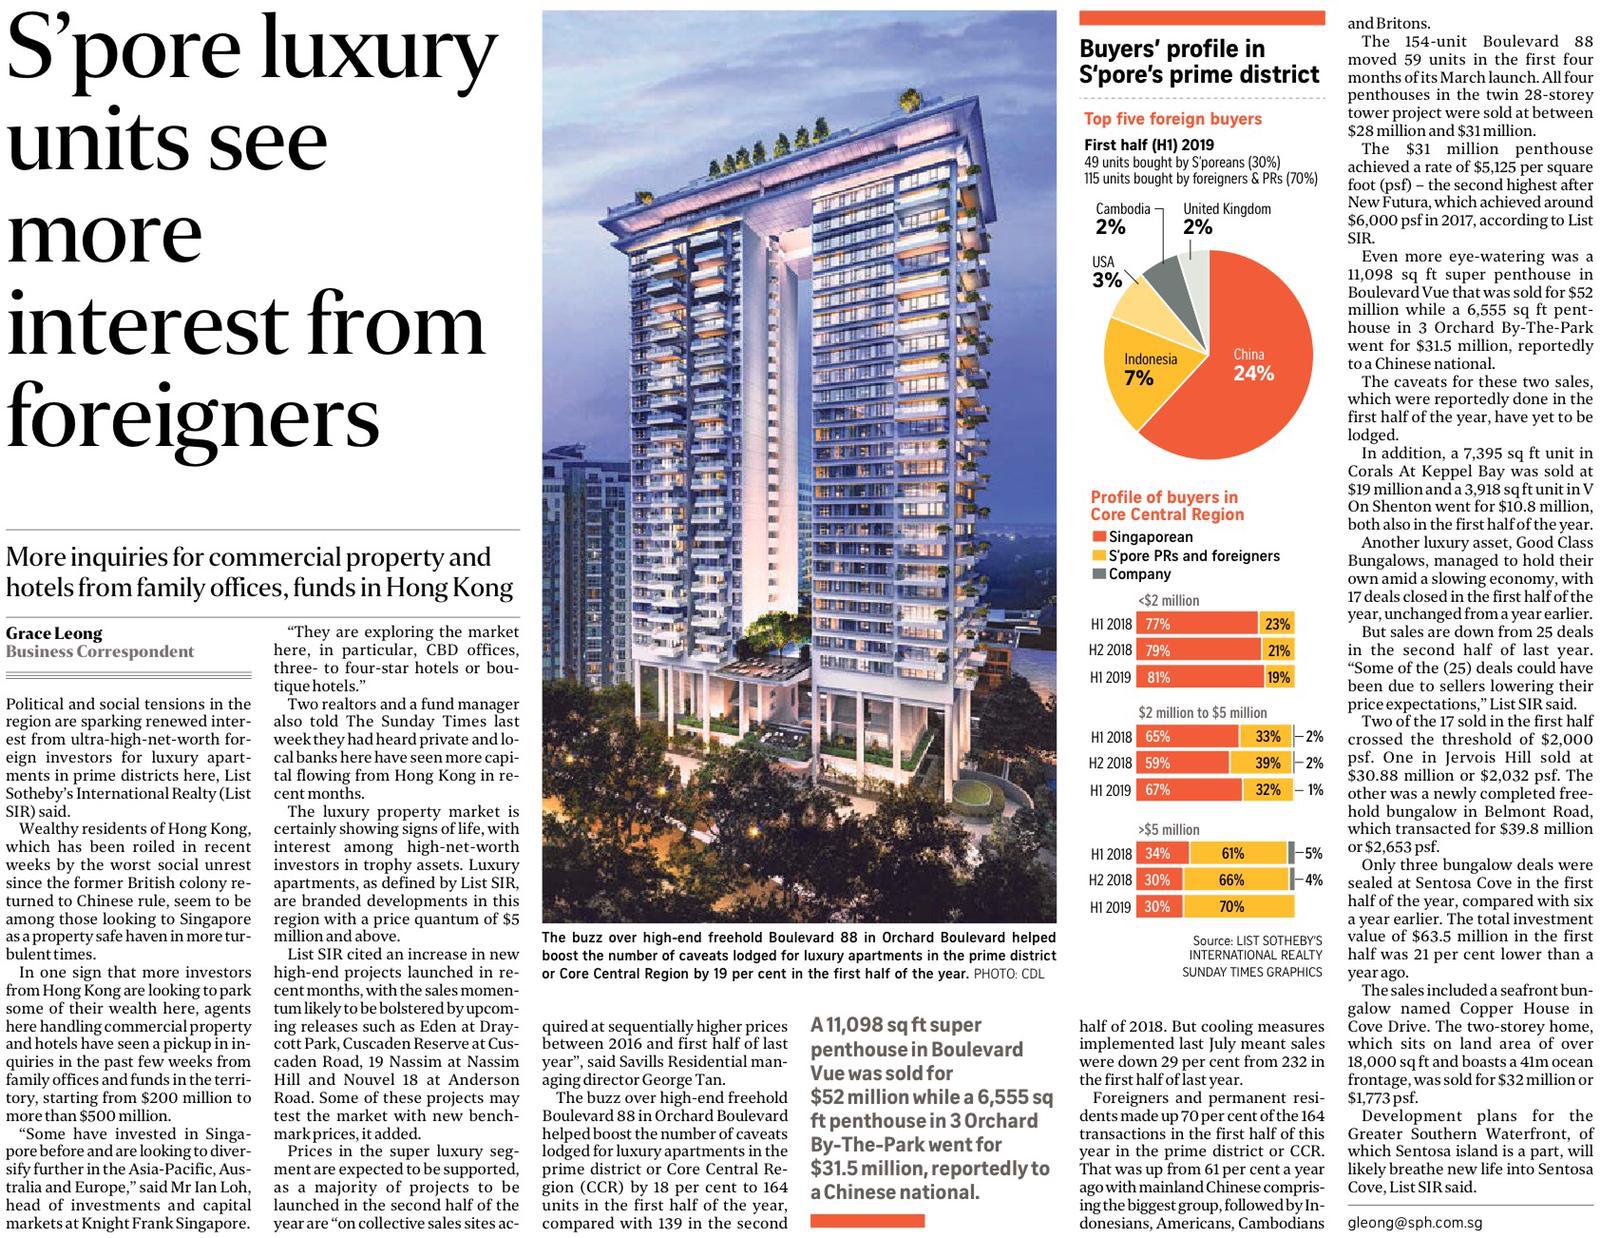 meyer-mansion-press-Singapore-luxury-units-see-more-interest-from-foreigners-singapore